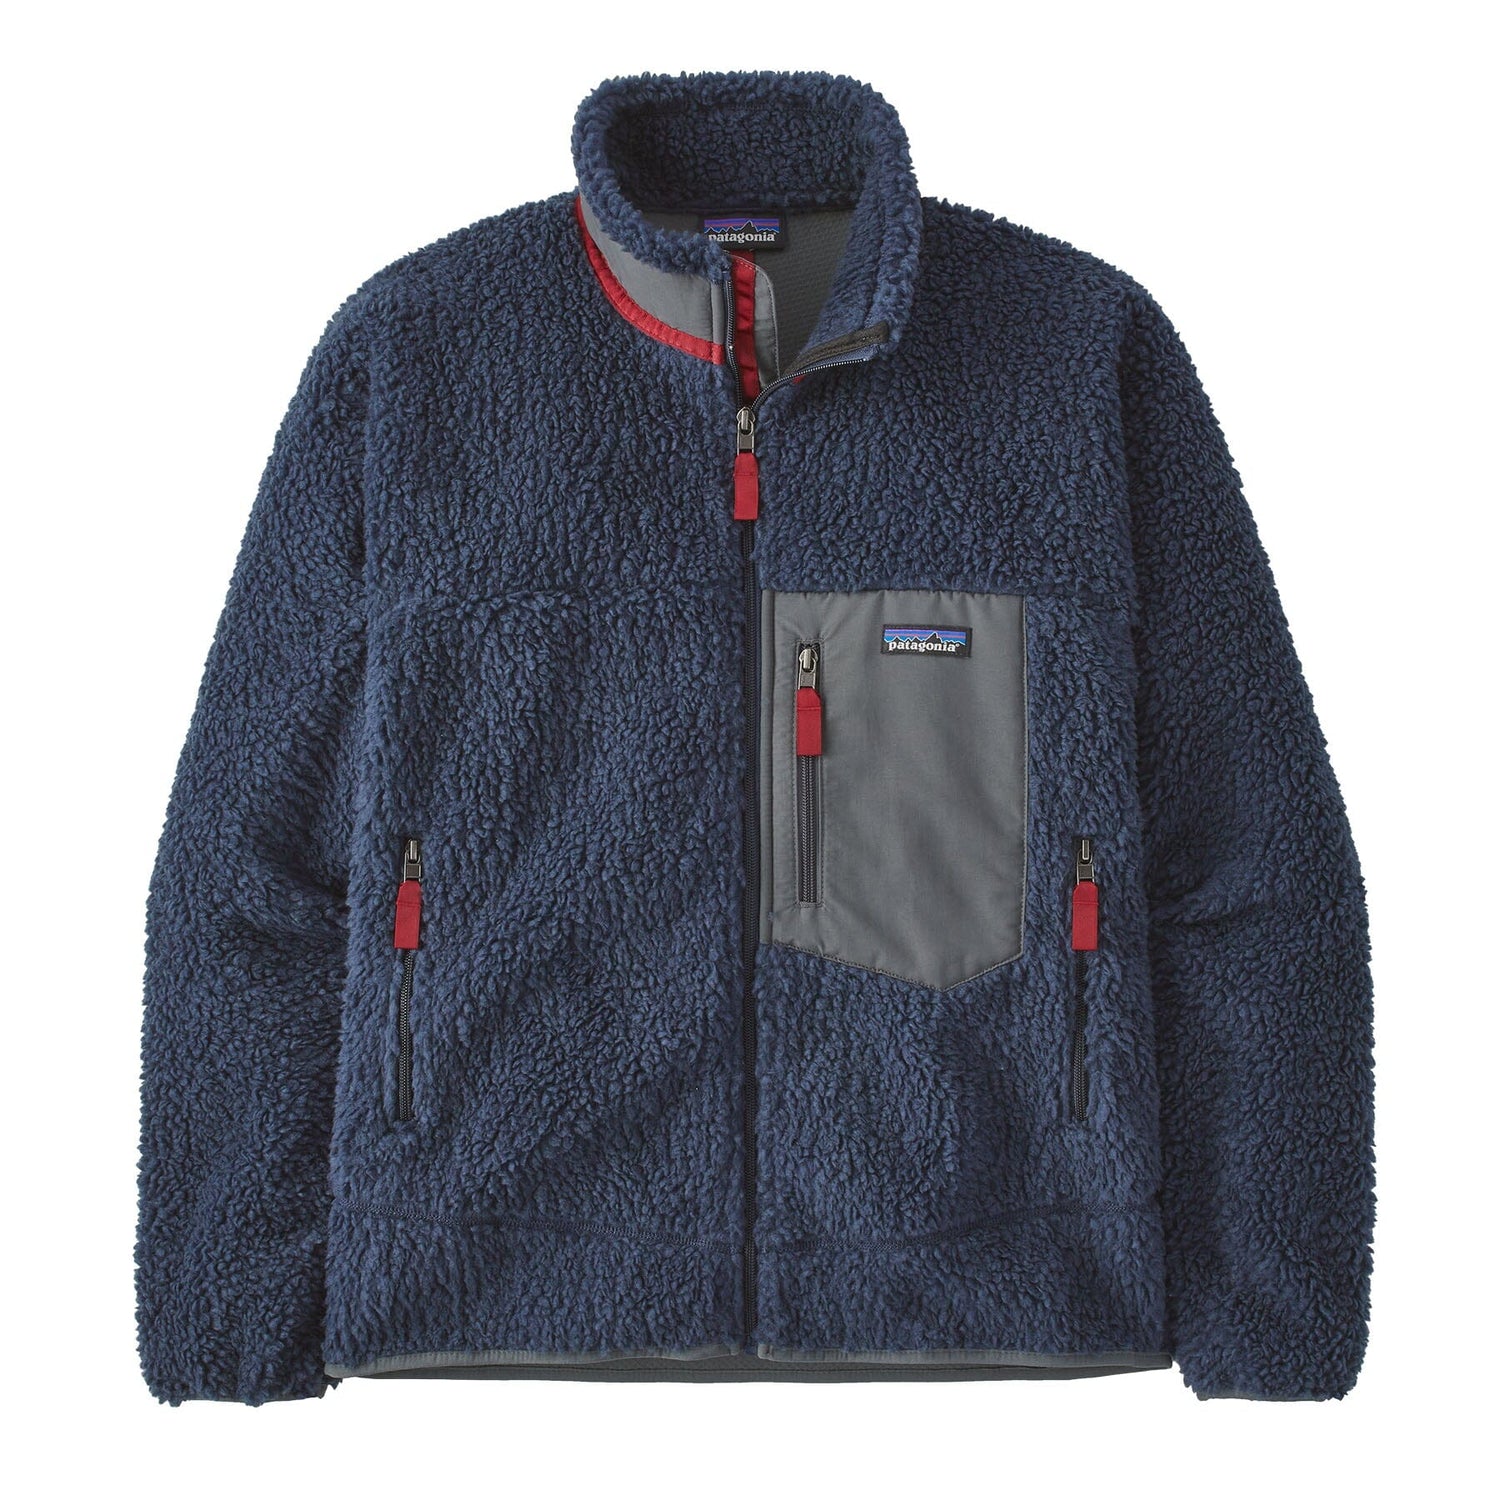 Patagonia M's Classic Retro-X Fleece Jacket - Recycled Polyester New Navy w/Wax Red Jacket